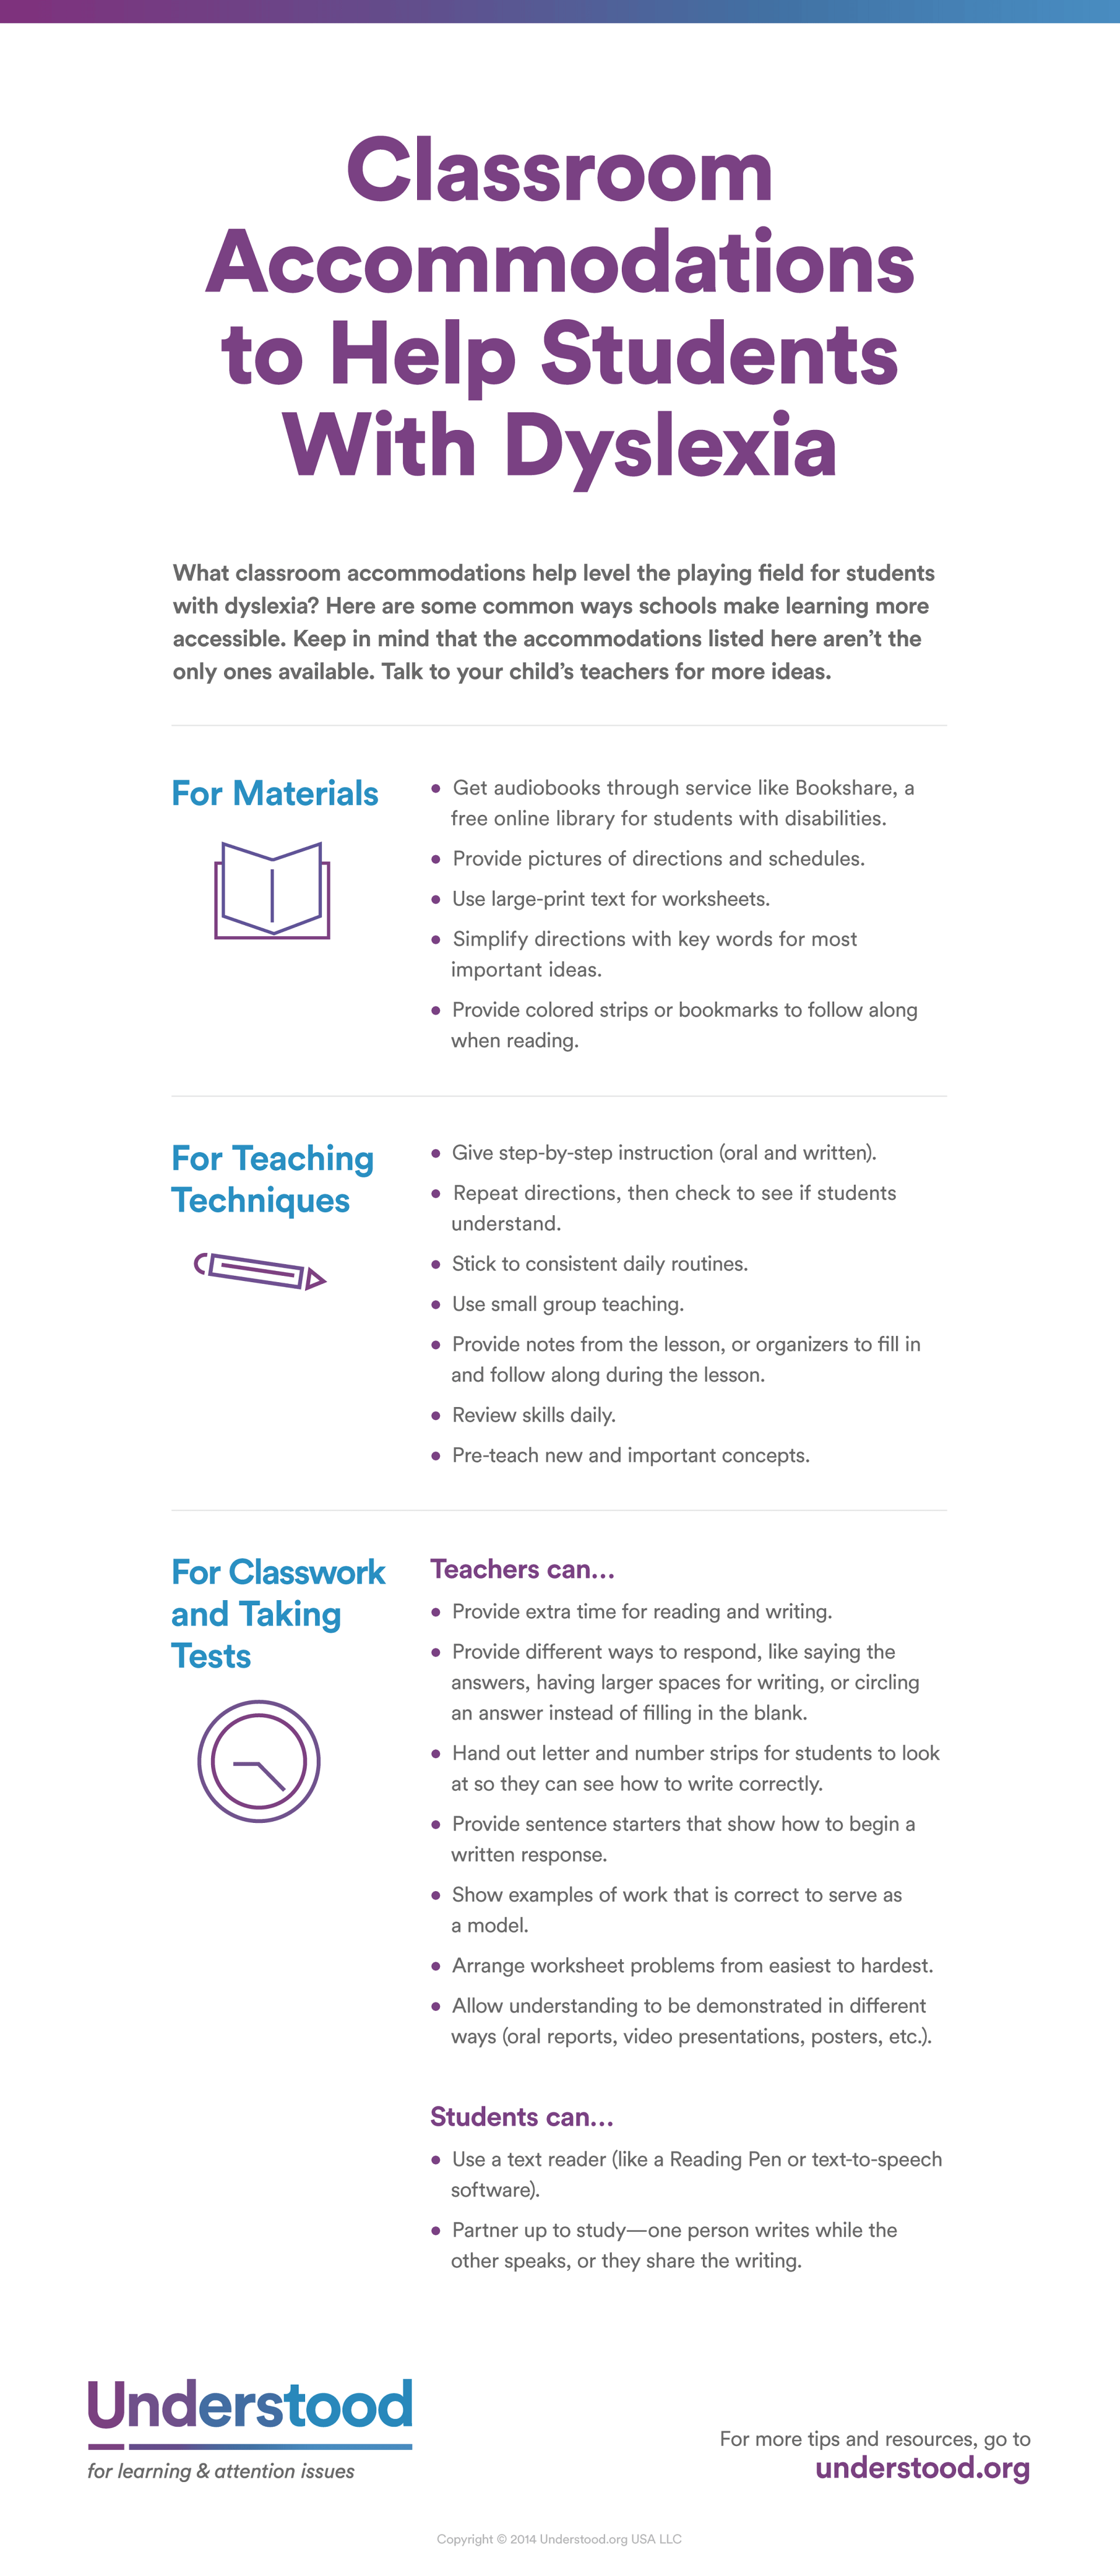 Classroom Accommodations for Dyslexia Infographic